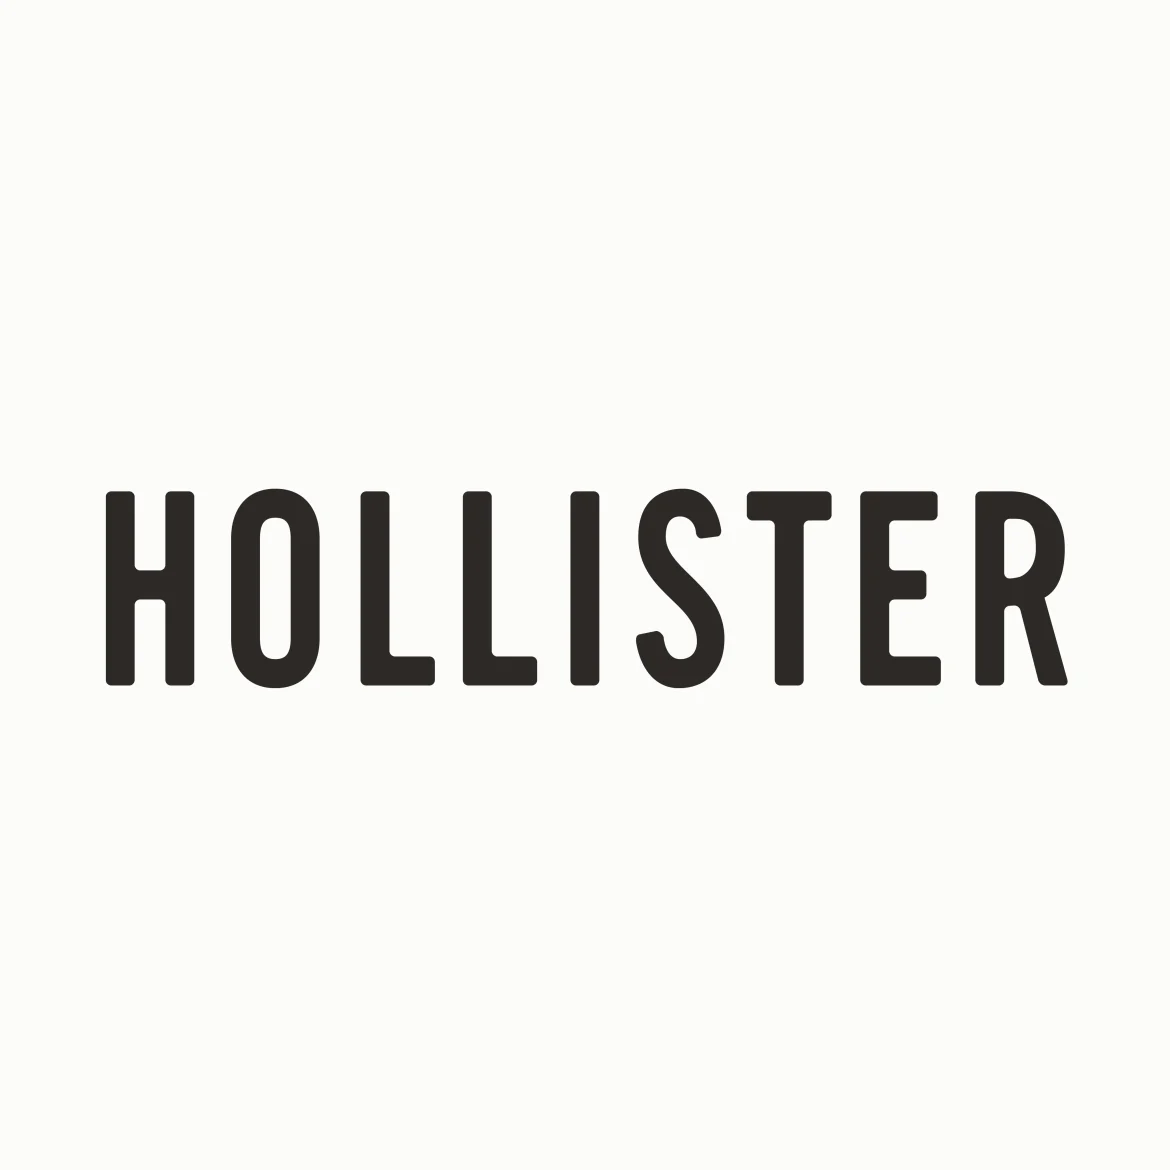 A Comprehensive Guide to Hollister’s Fashion Essentials